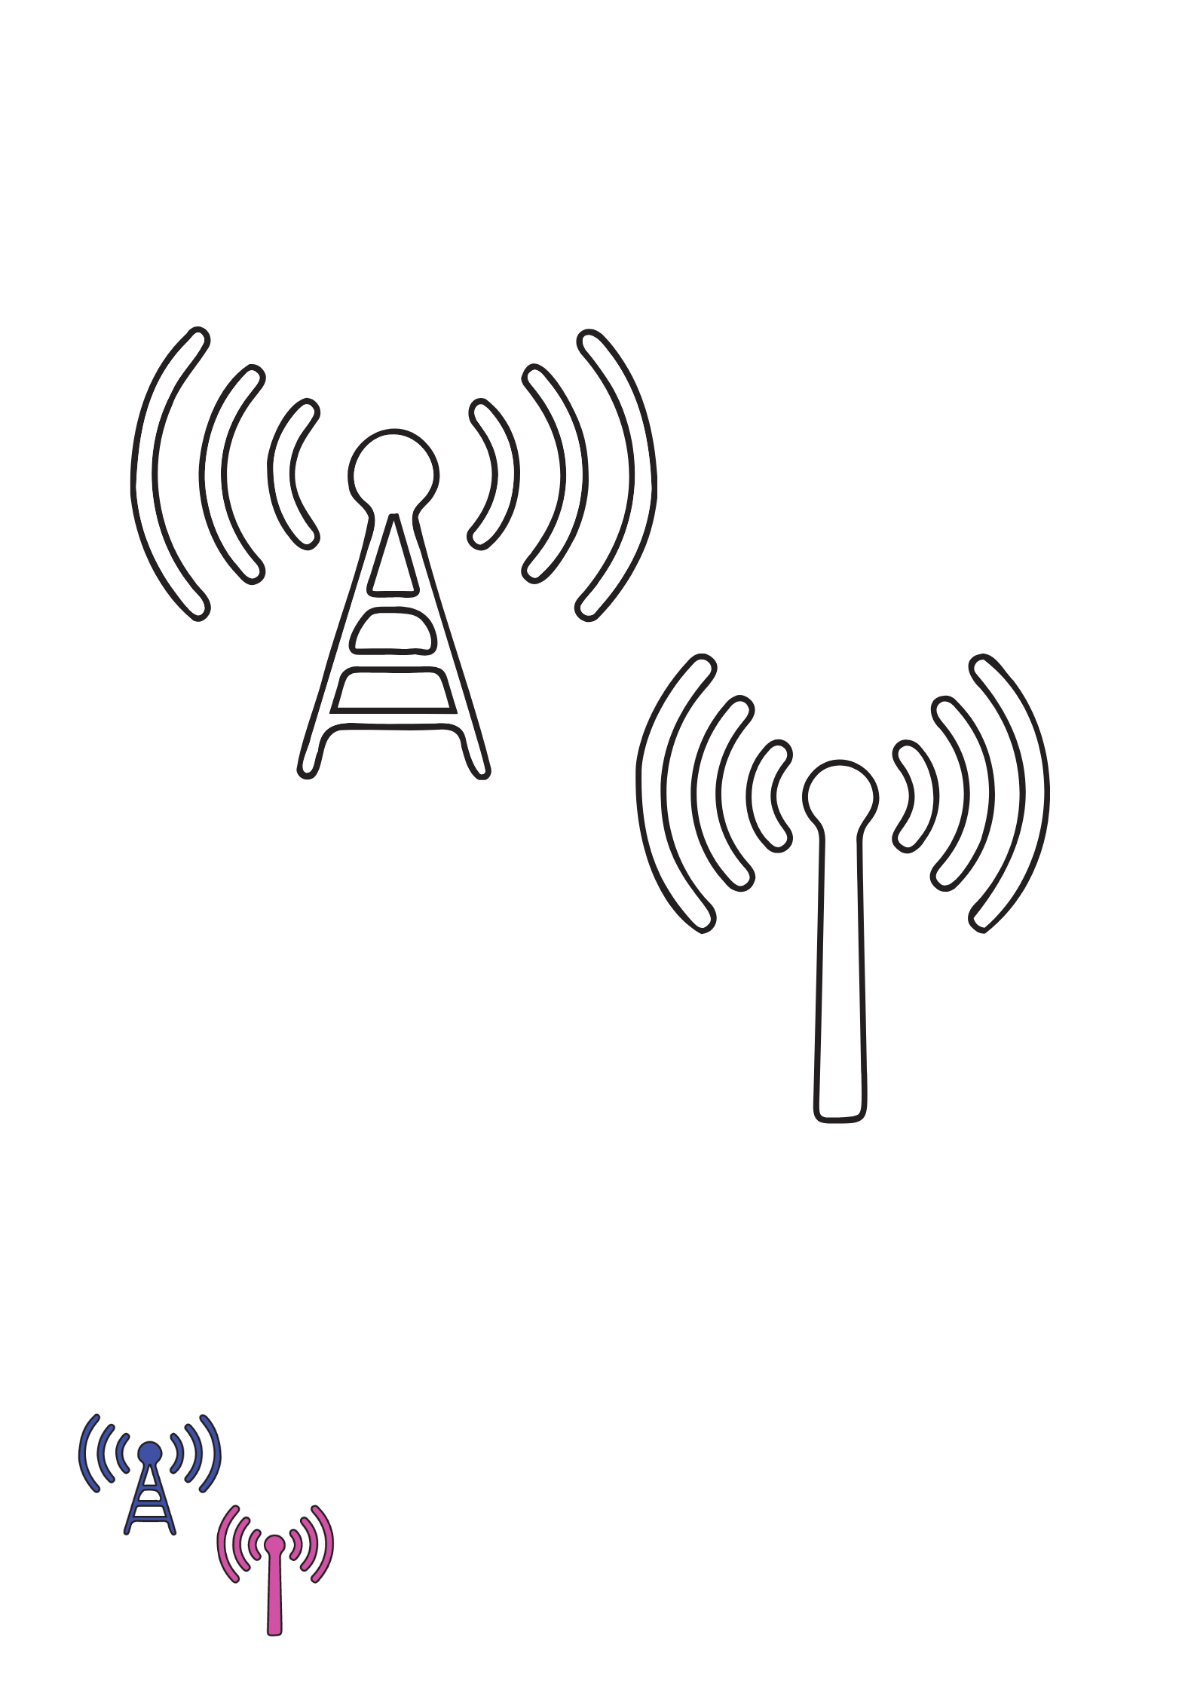 Wifi Tower coloring page Template